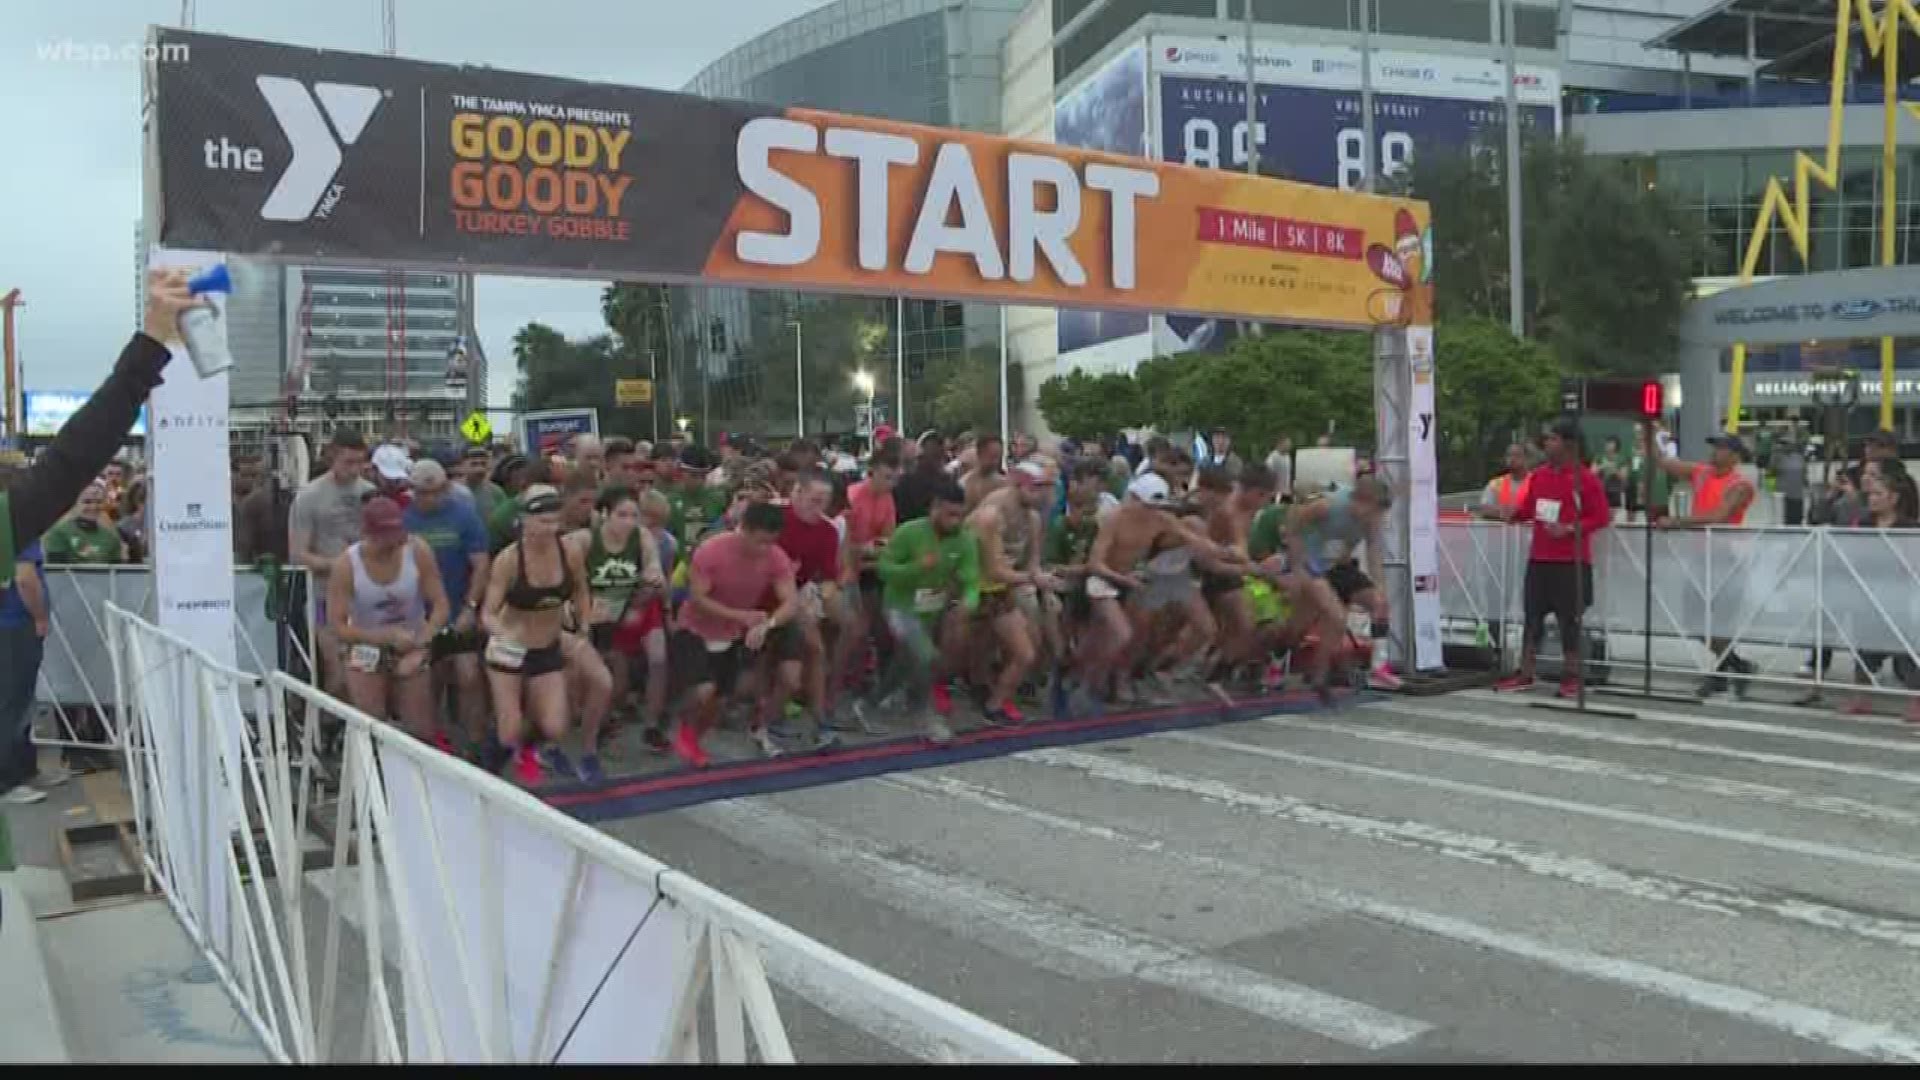 17-thousand Runners were out before 7-am for the 5k, 8k and a 1 mile run and walk. It's a Thanksgiving Tradition that raises money for cancer survivors.